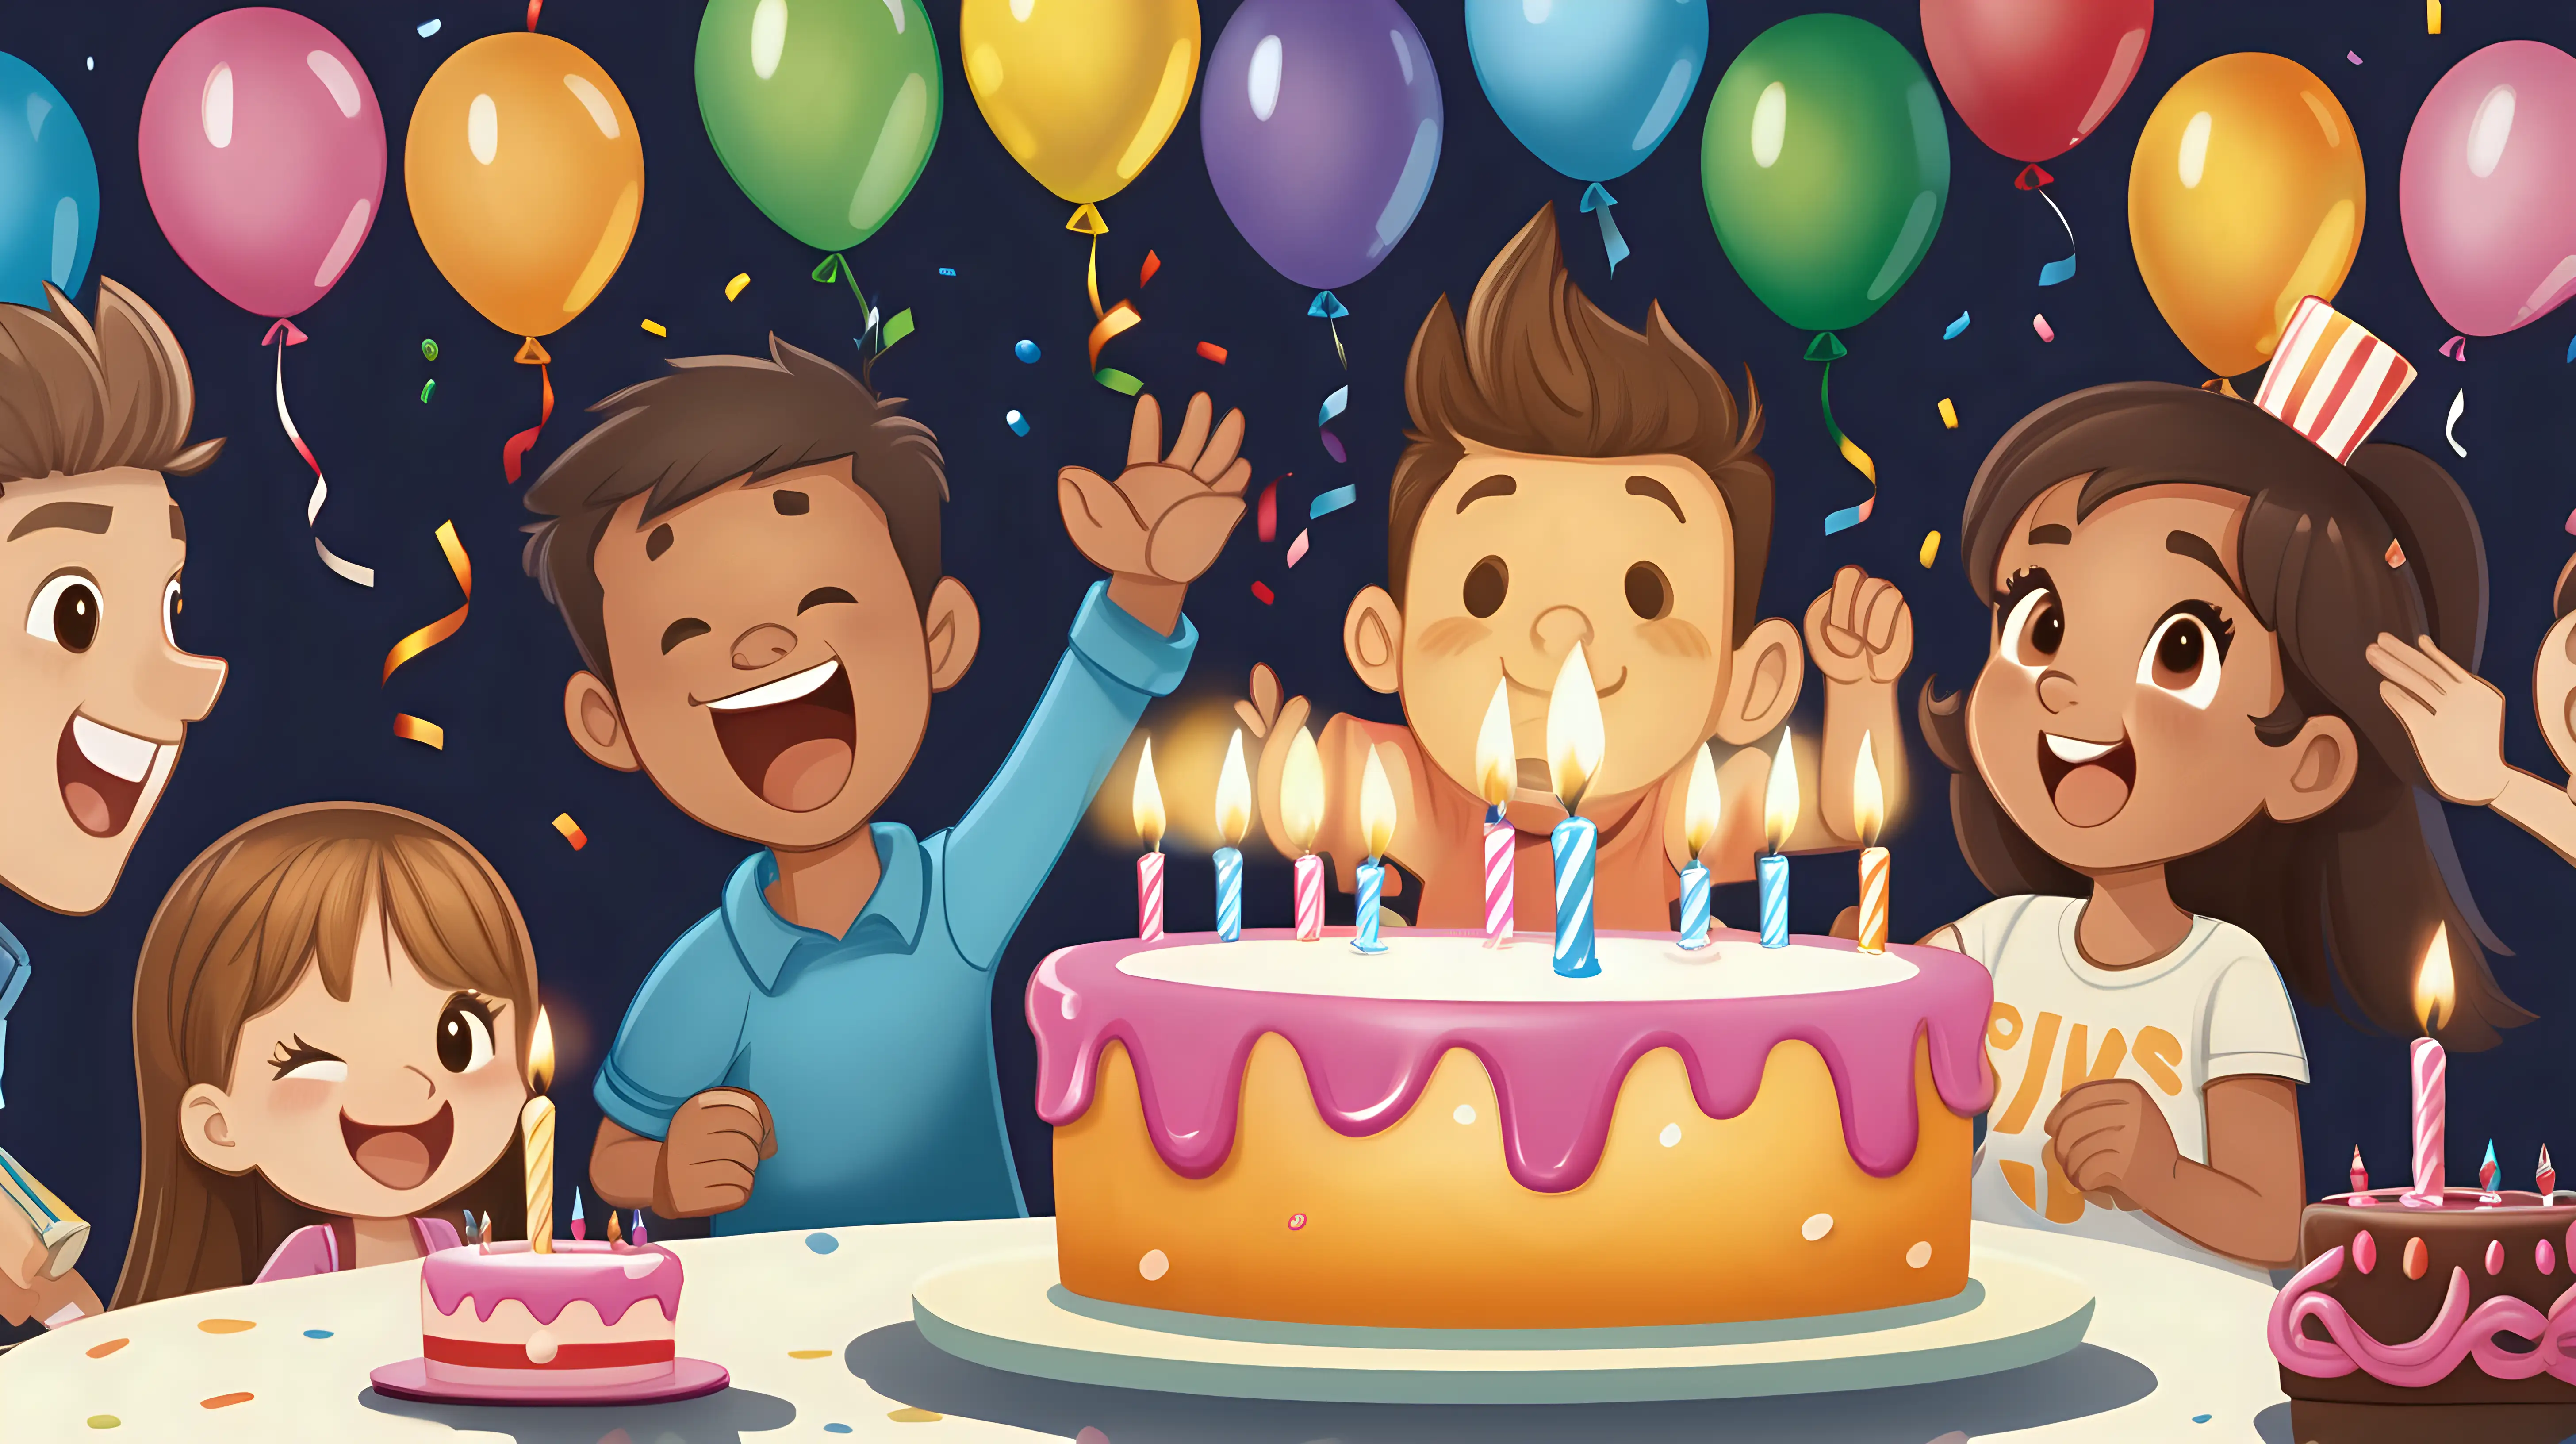 Highlight the excitement of the birthday boy or girl as they blow out the candles, surrounded by friends and family cheering them on with love and laughter.